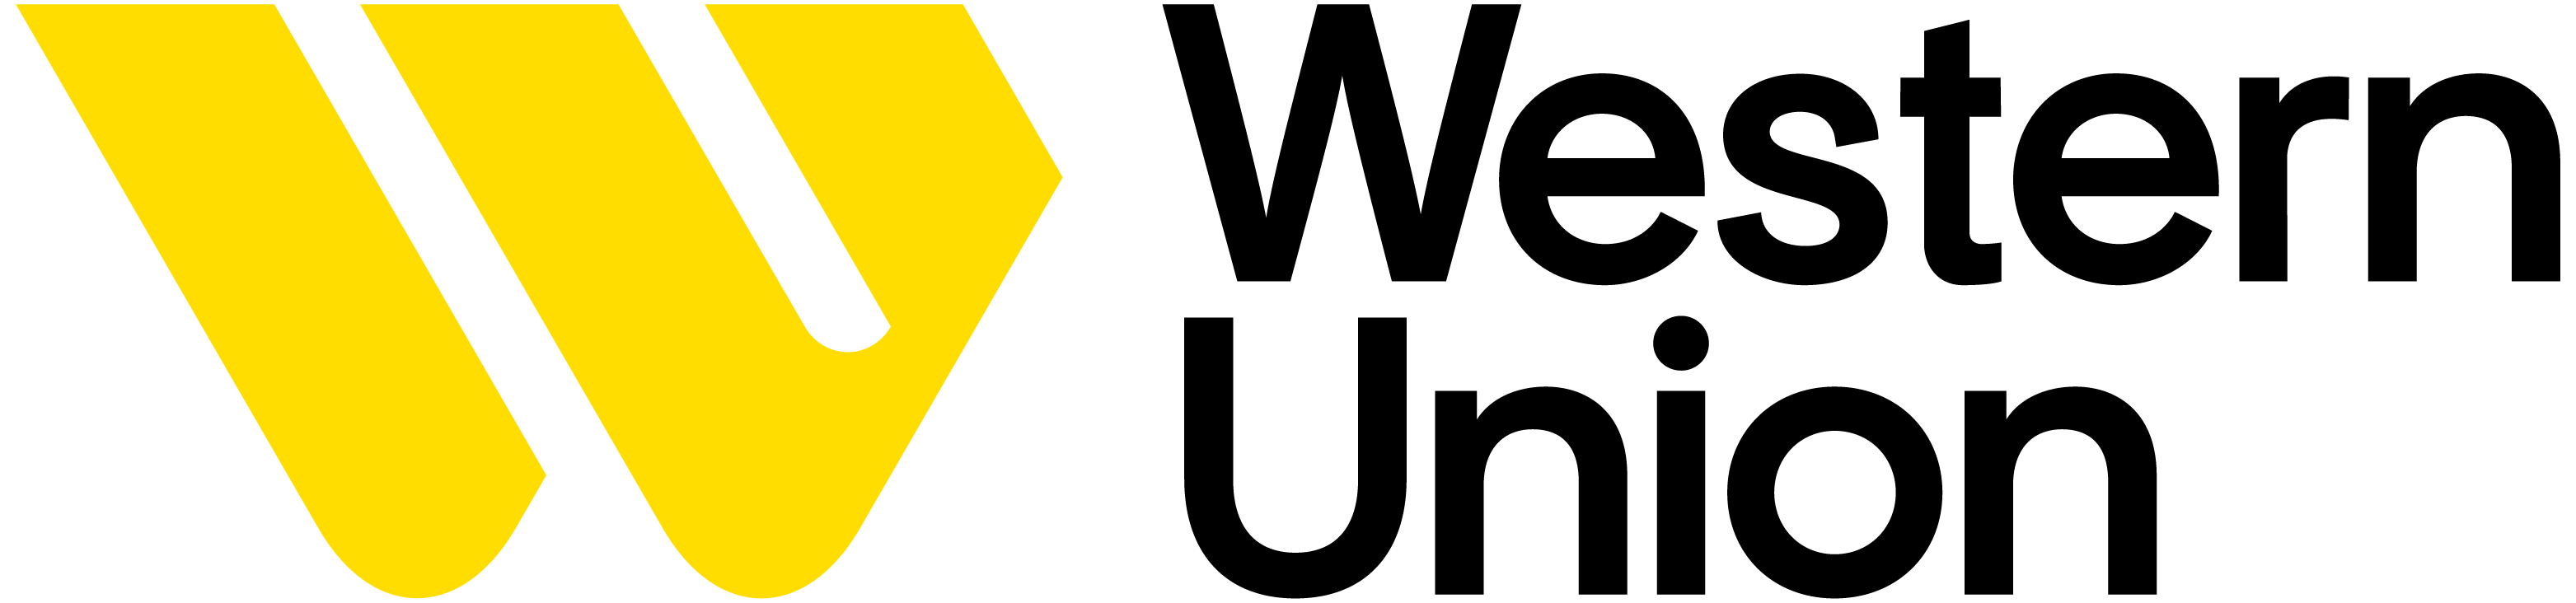 Western Union text in black, with yellow logo on the left side